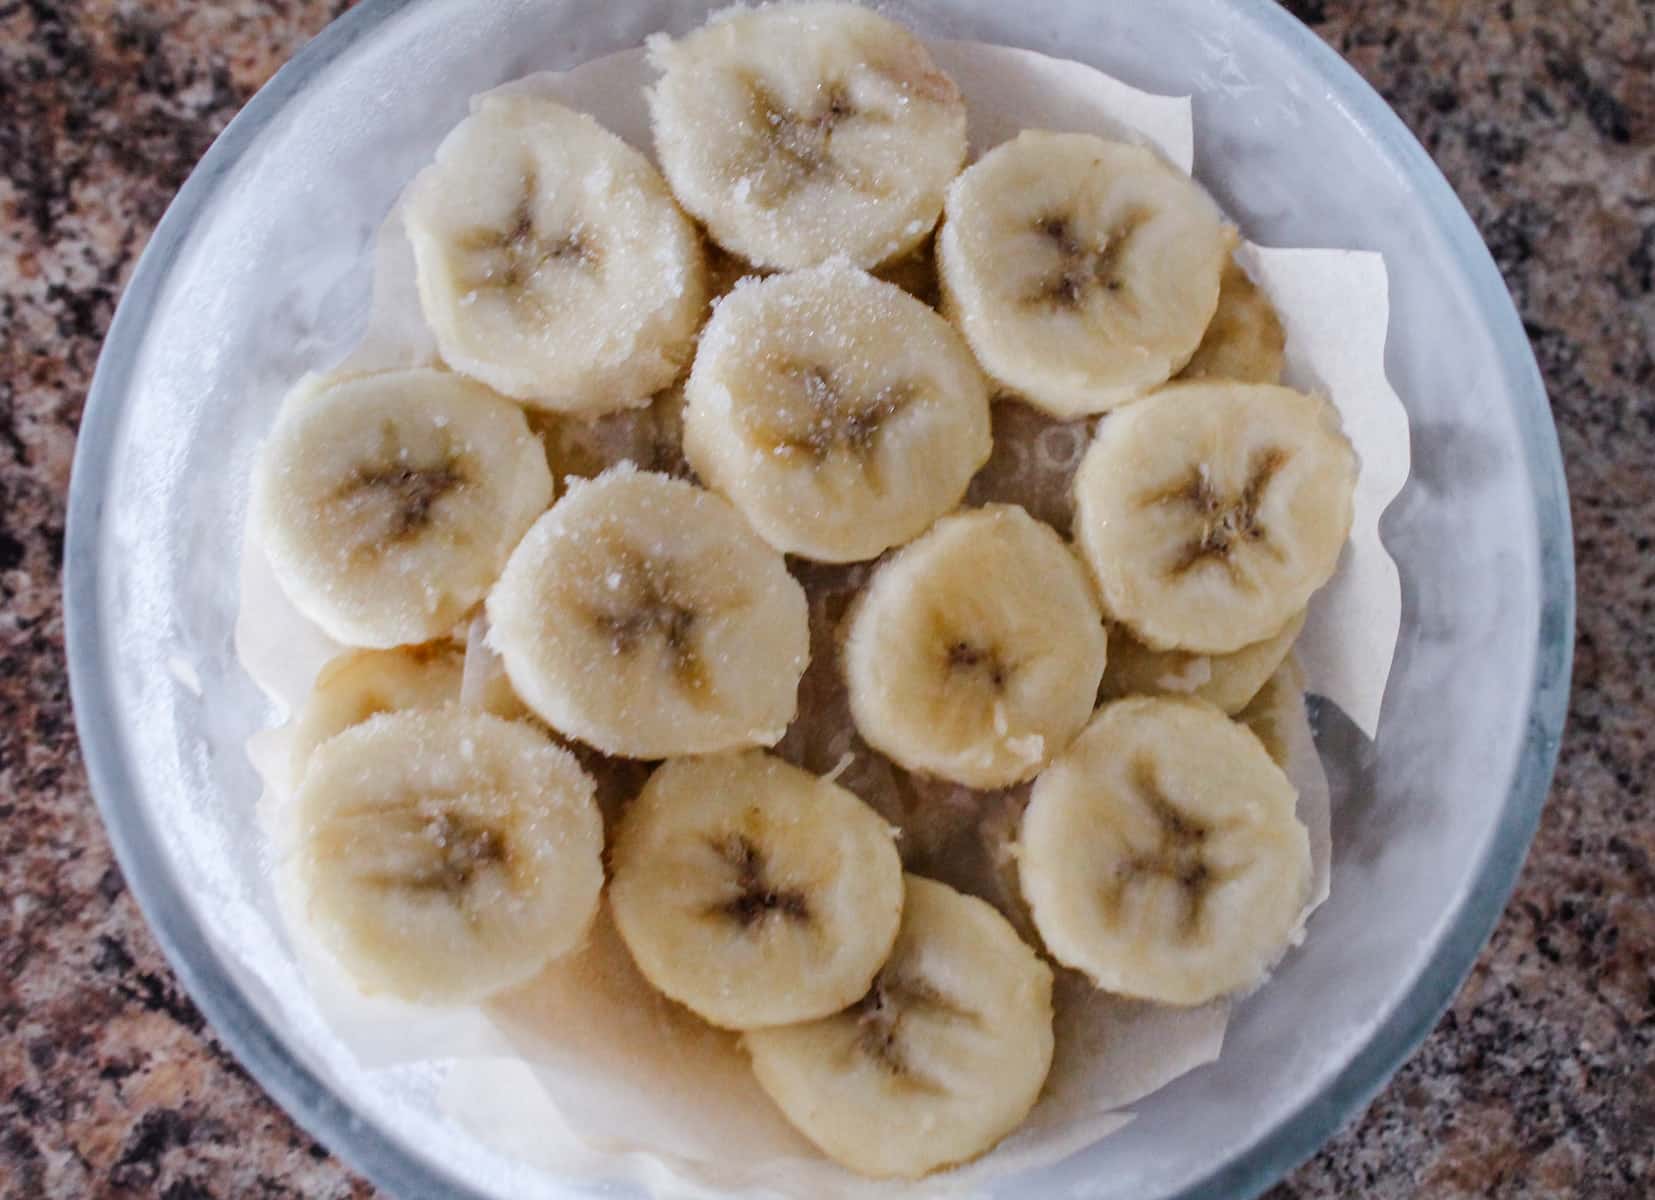 frozen slices of banana in a container.